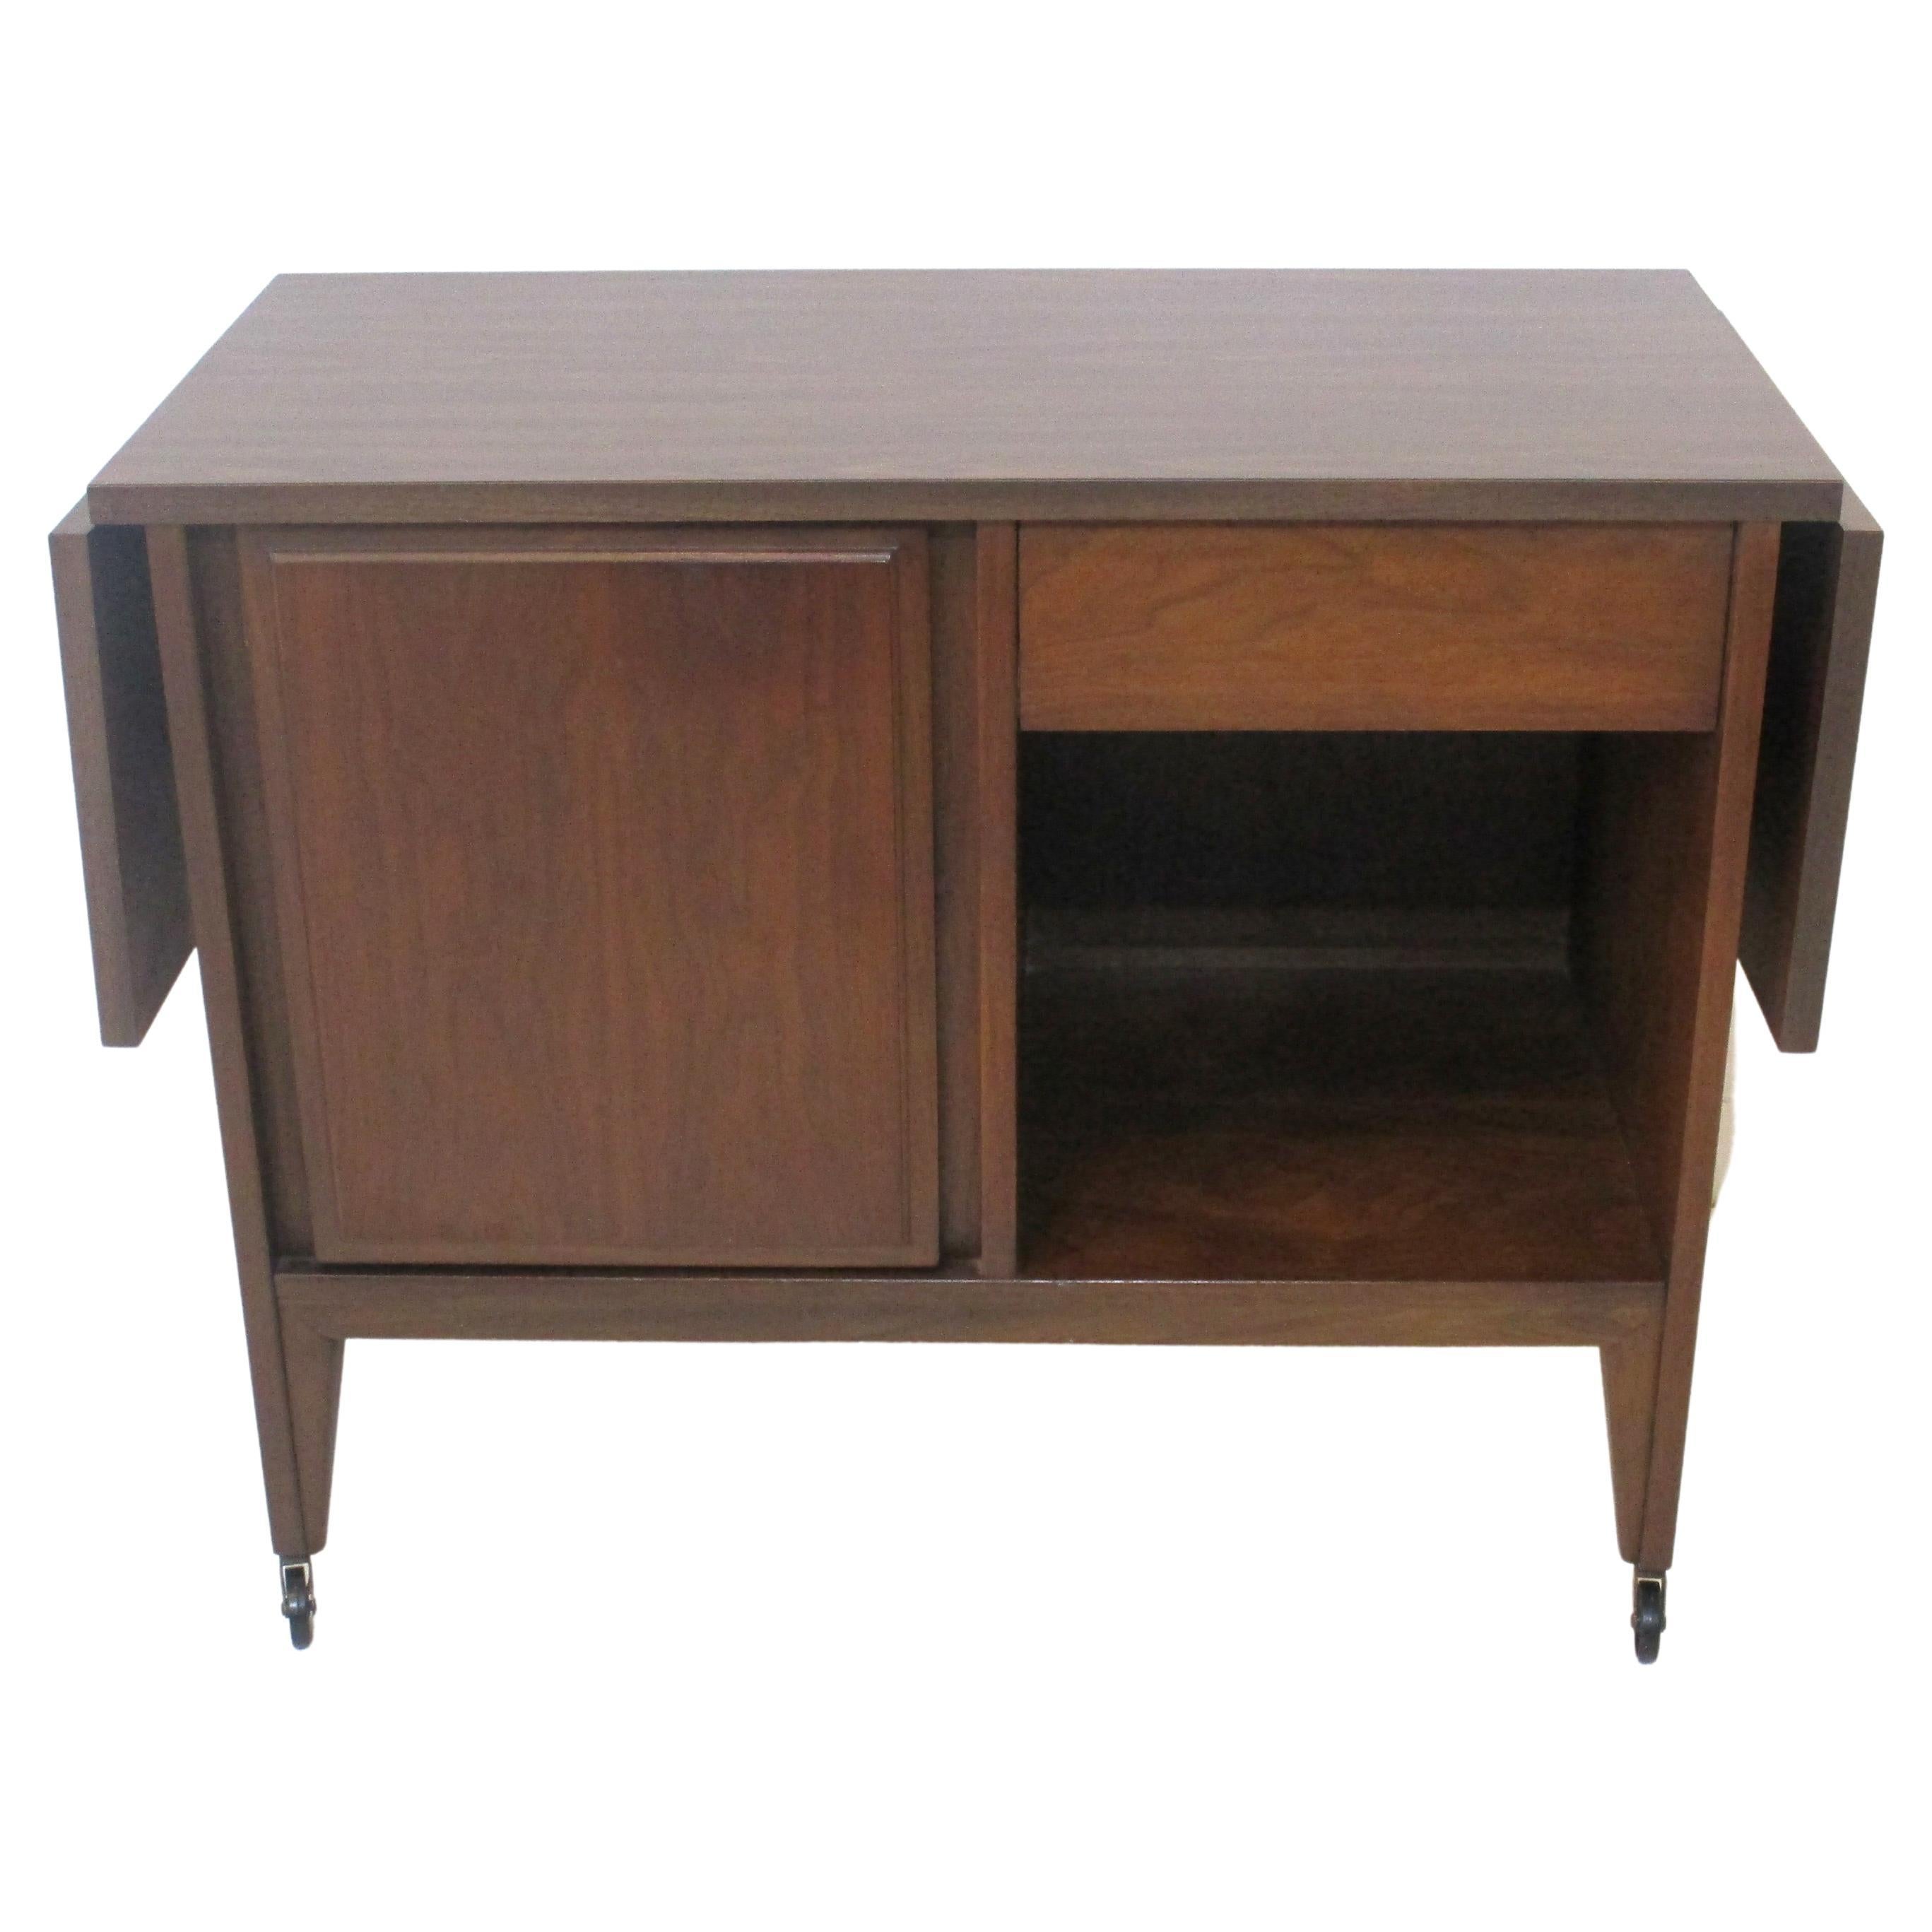 A medium walnut rolling bar cart with folding formica covered top making for a larger mixing and party area. Below there's a door with storage for bottles and glasses with a shelve, a upper drawer for bar tools and an additional open storage area.